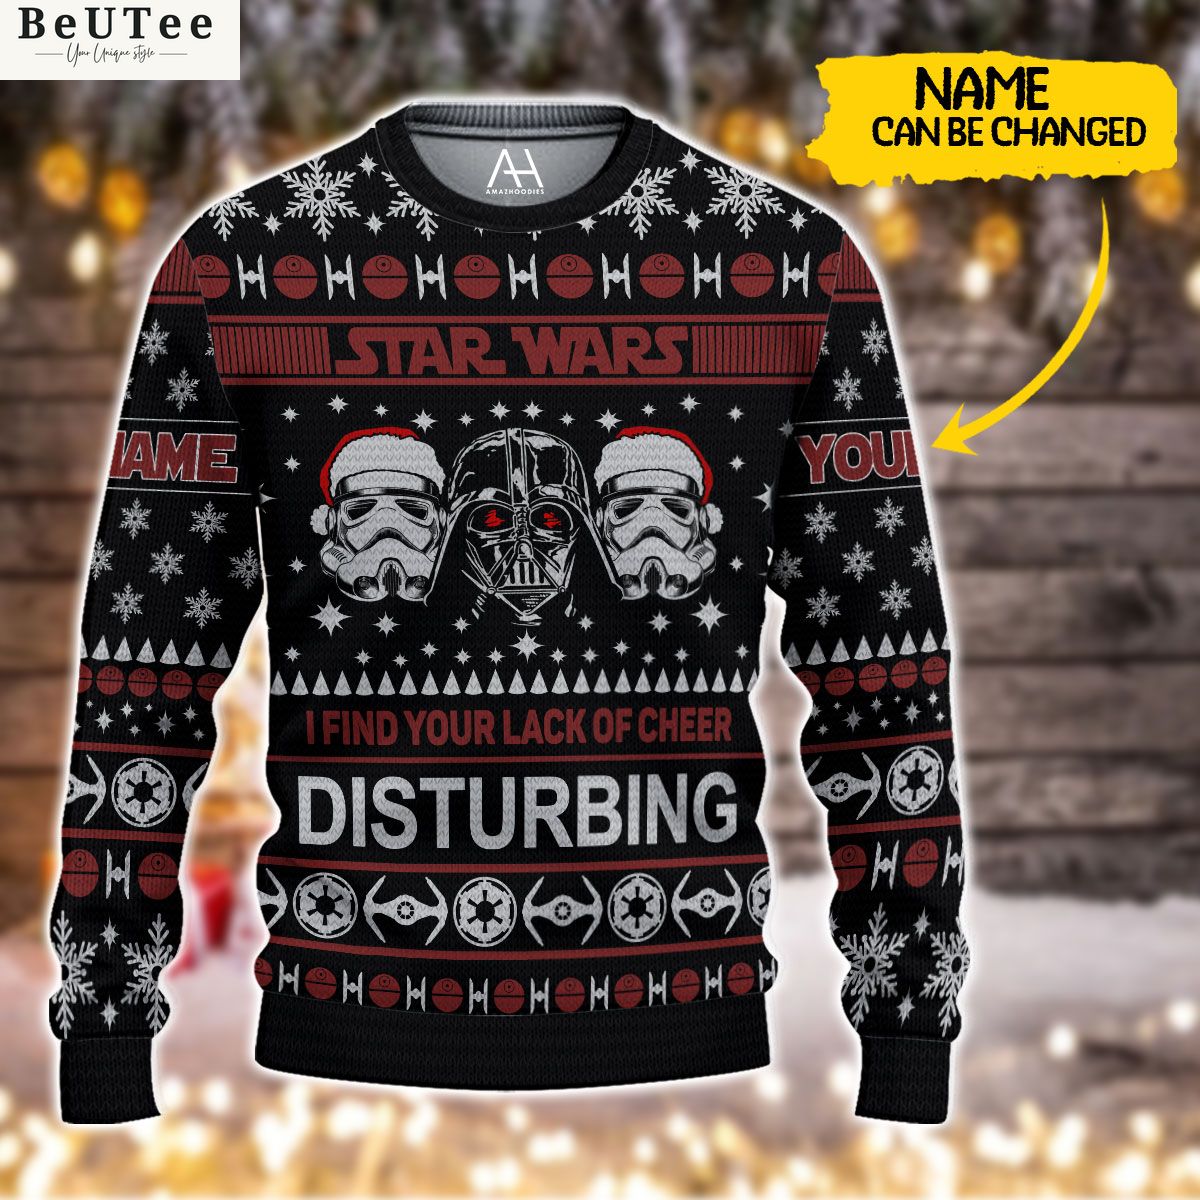 star wars ugly christmas sweater find your lack of cheer disturbing 1 jqNCp.jpg